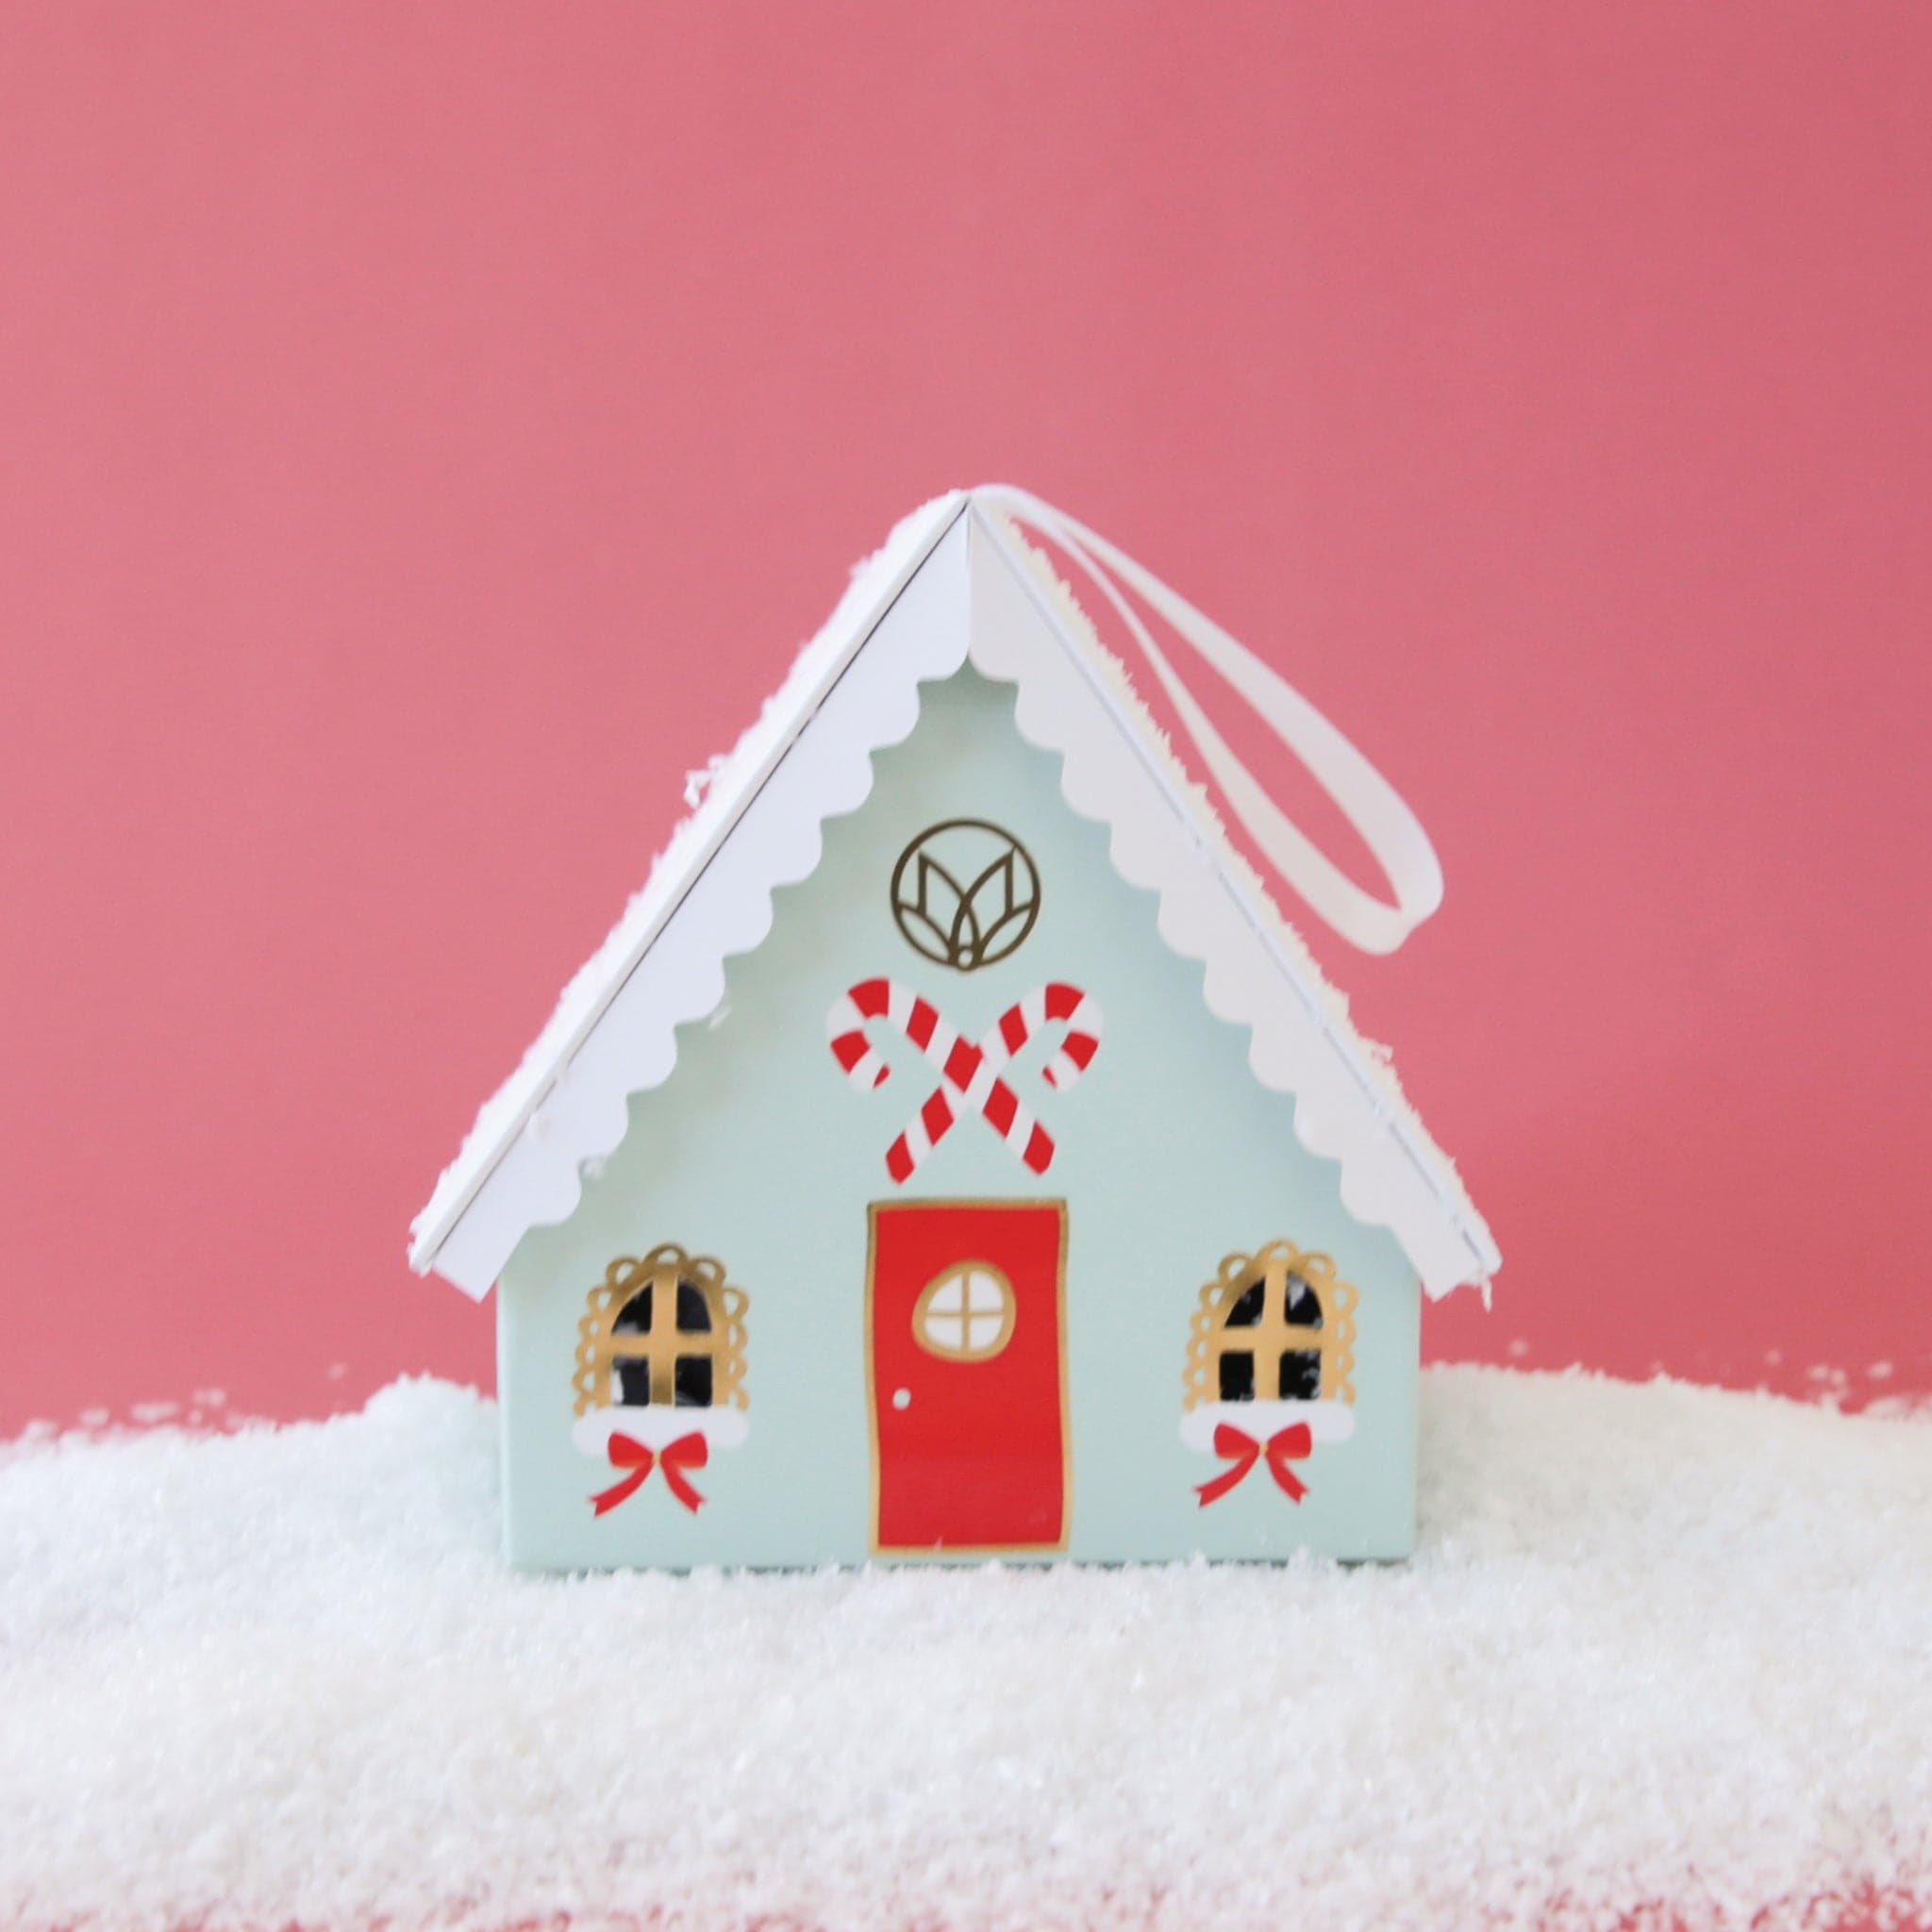 A blue holiday cottage that is home to a blue bath bomb. The cardboard cottage comes with a ribbon loop at the top that makes it double as an ornament.